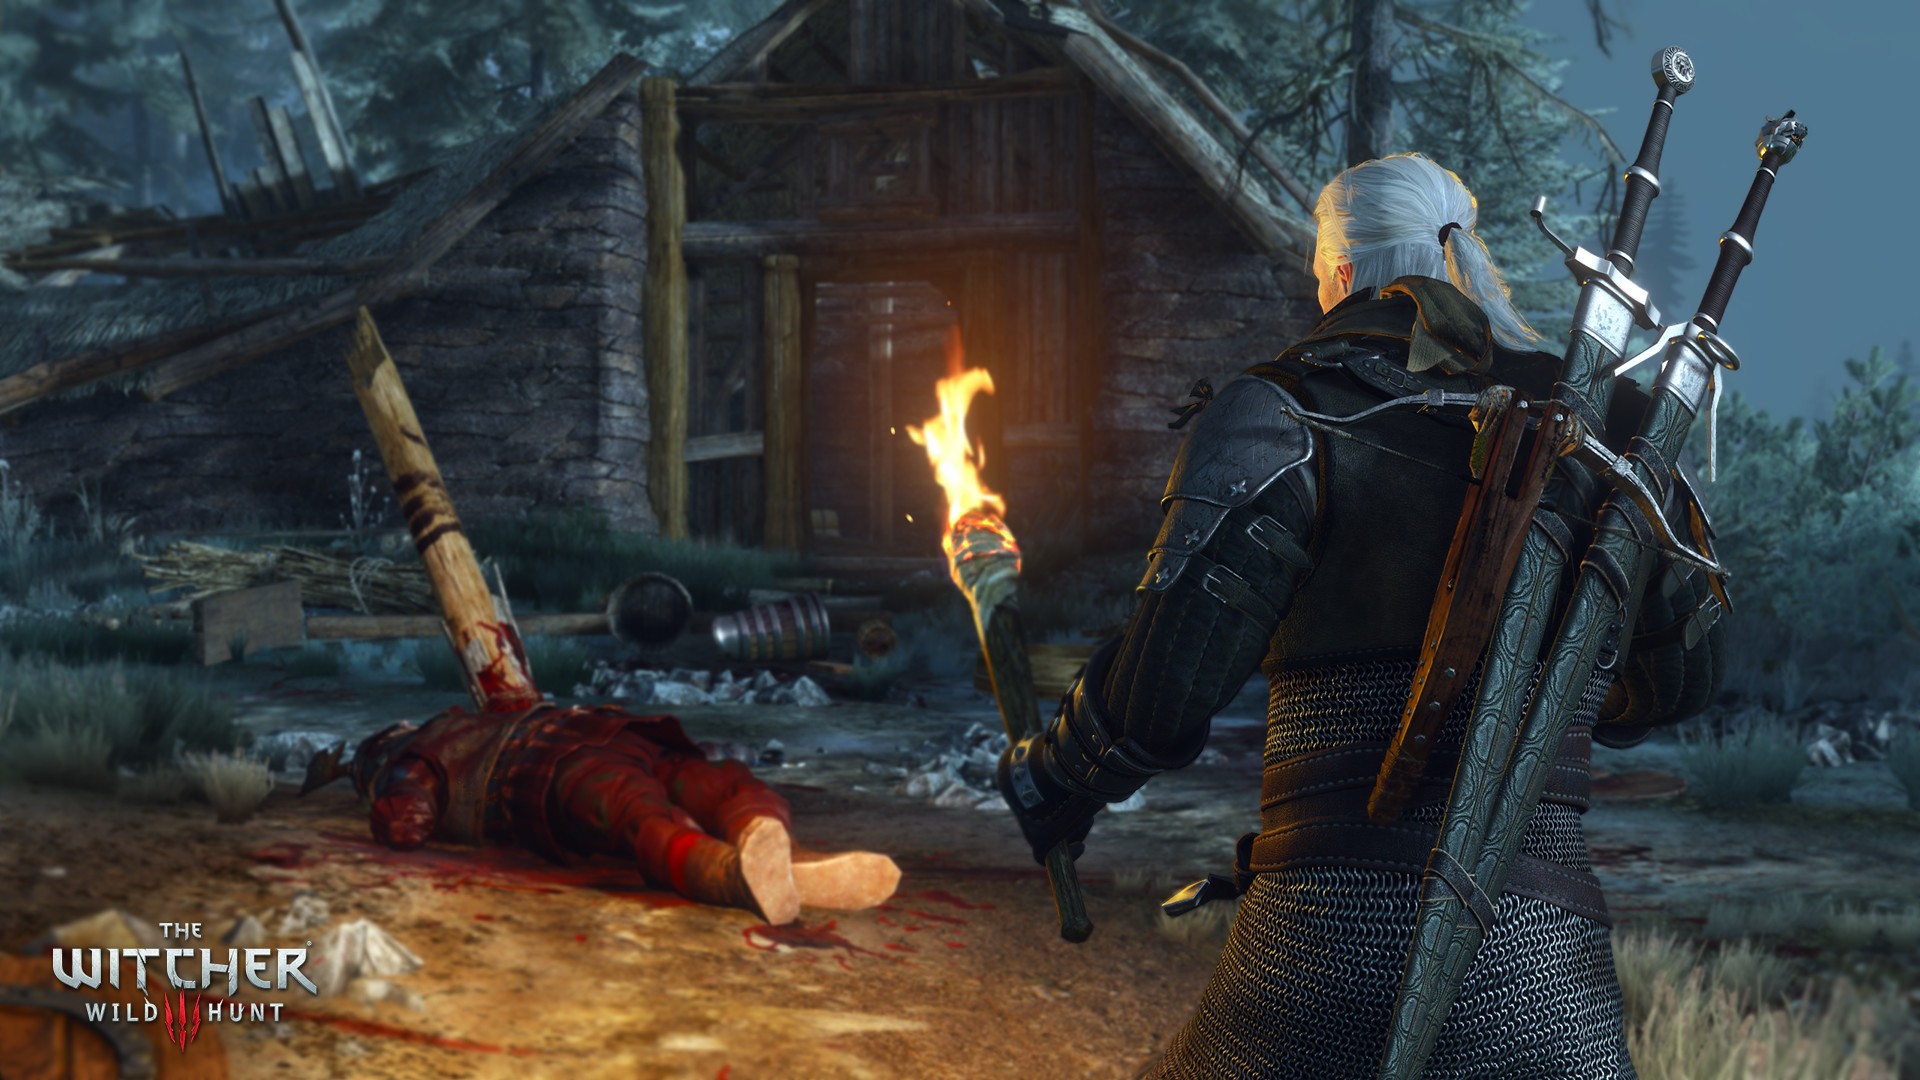 General 1920x1080 The Witcher 3: Wild Hunt Geralt of Rivia CD Projekt RED video games torches blood RPG PC gaming